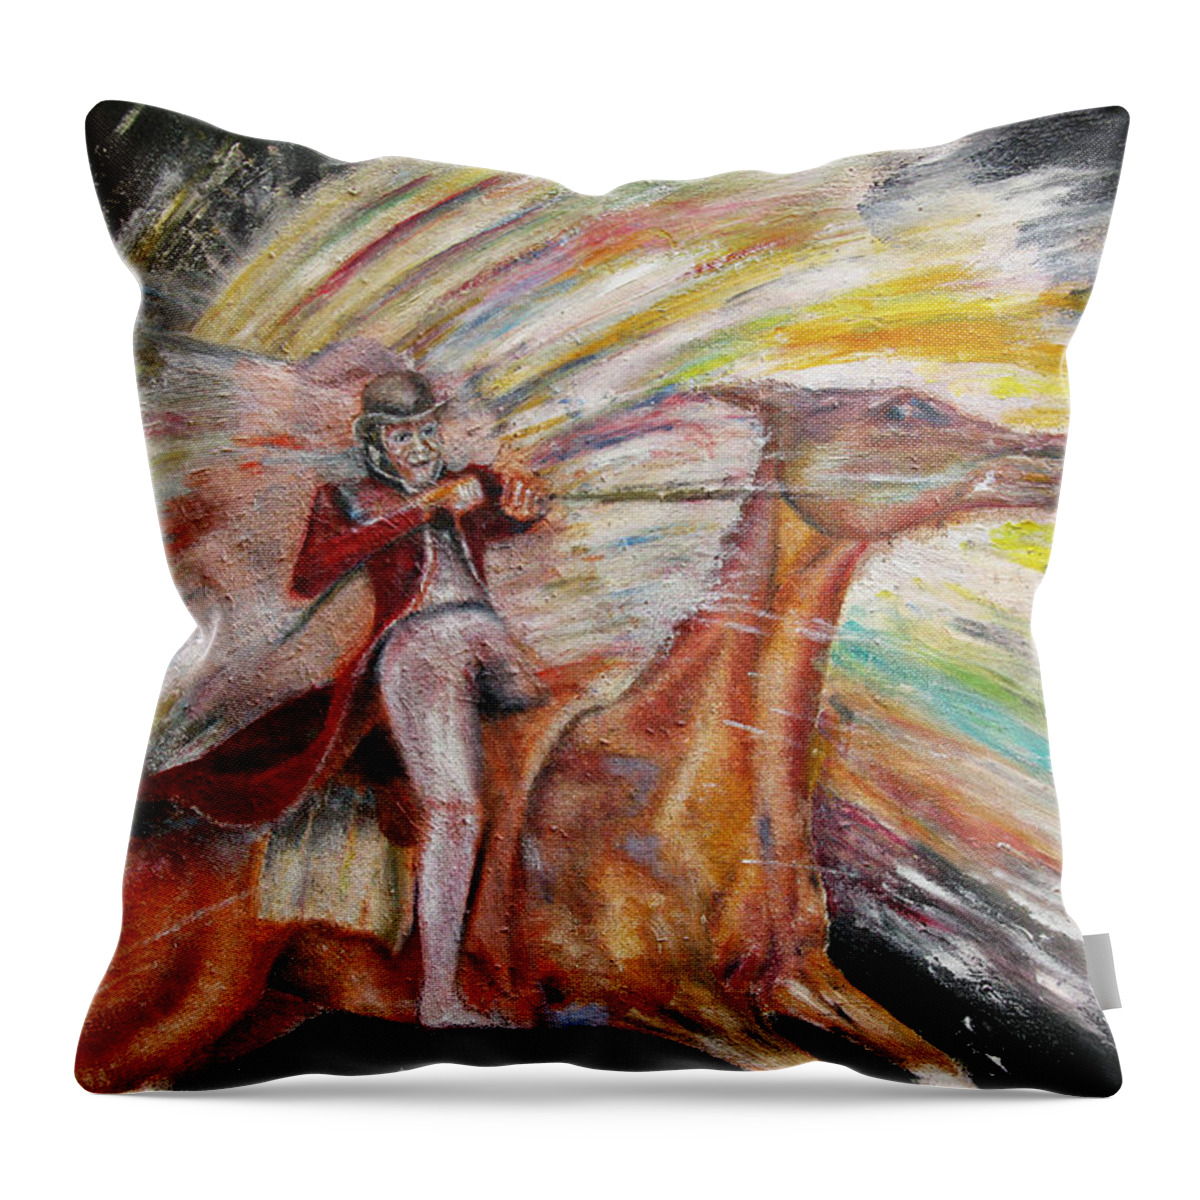 Horses Throw Pillow featuring the painting Jump The Rainbow by Tom Conway